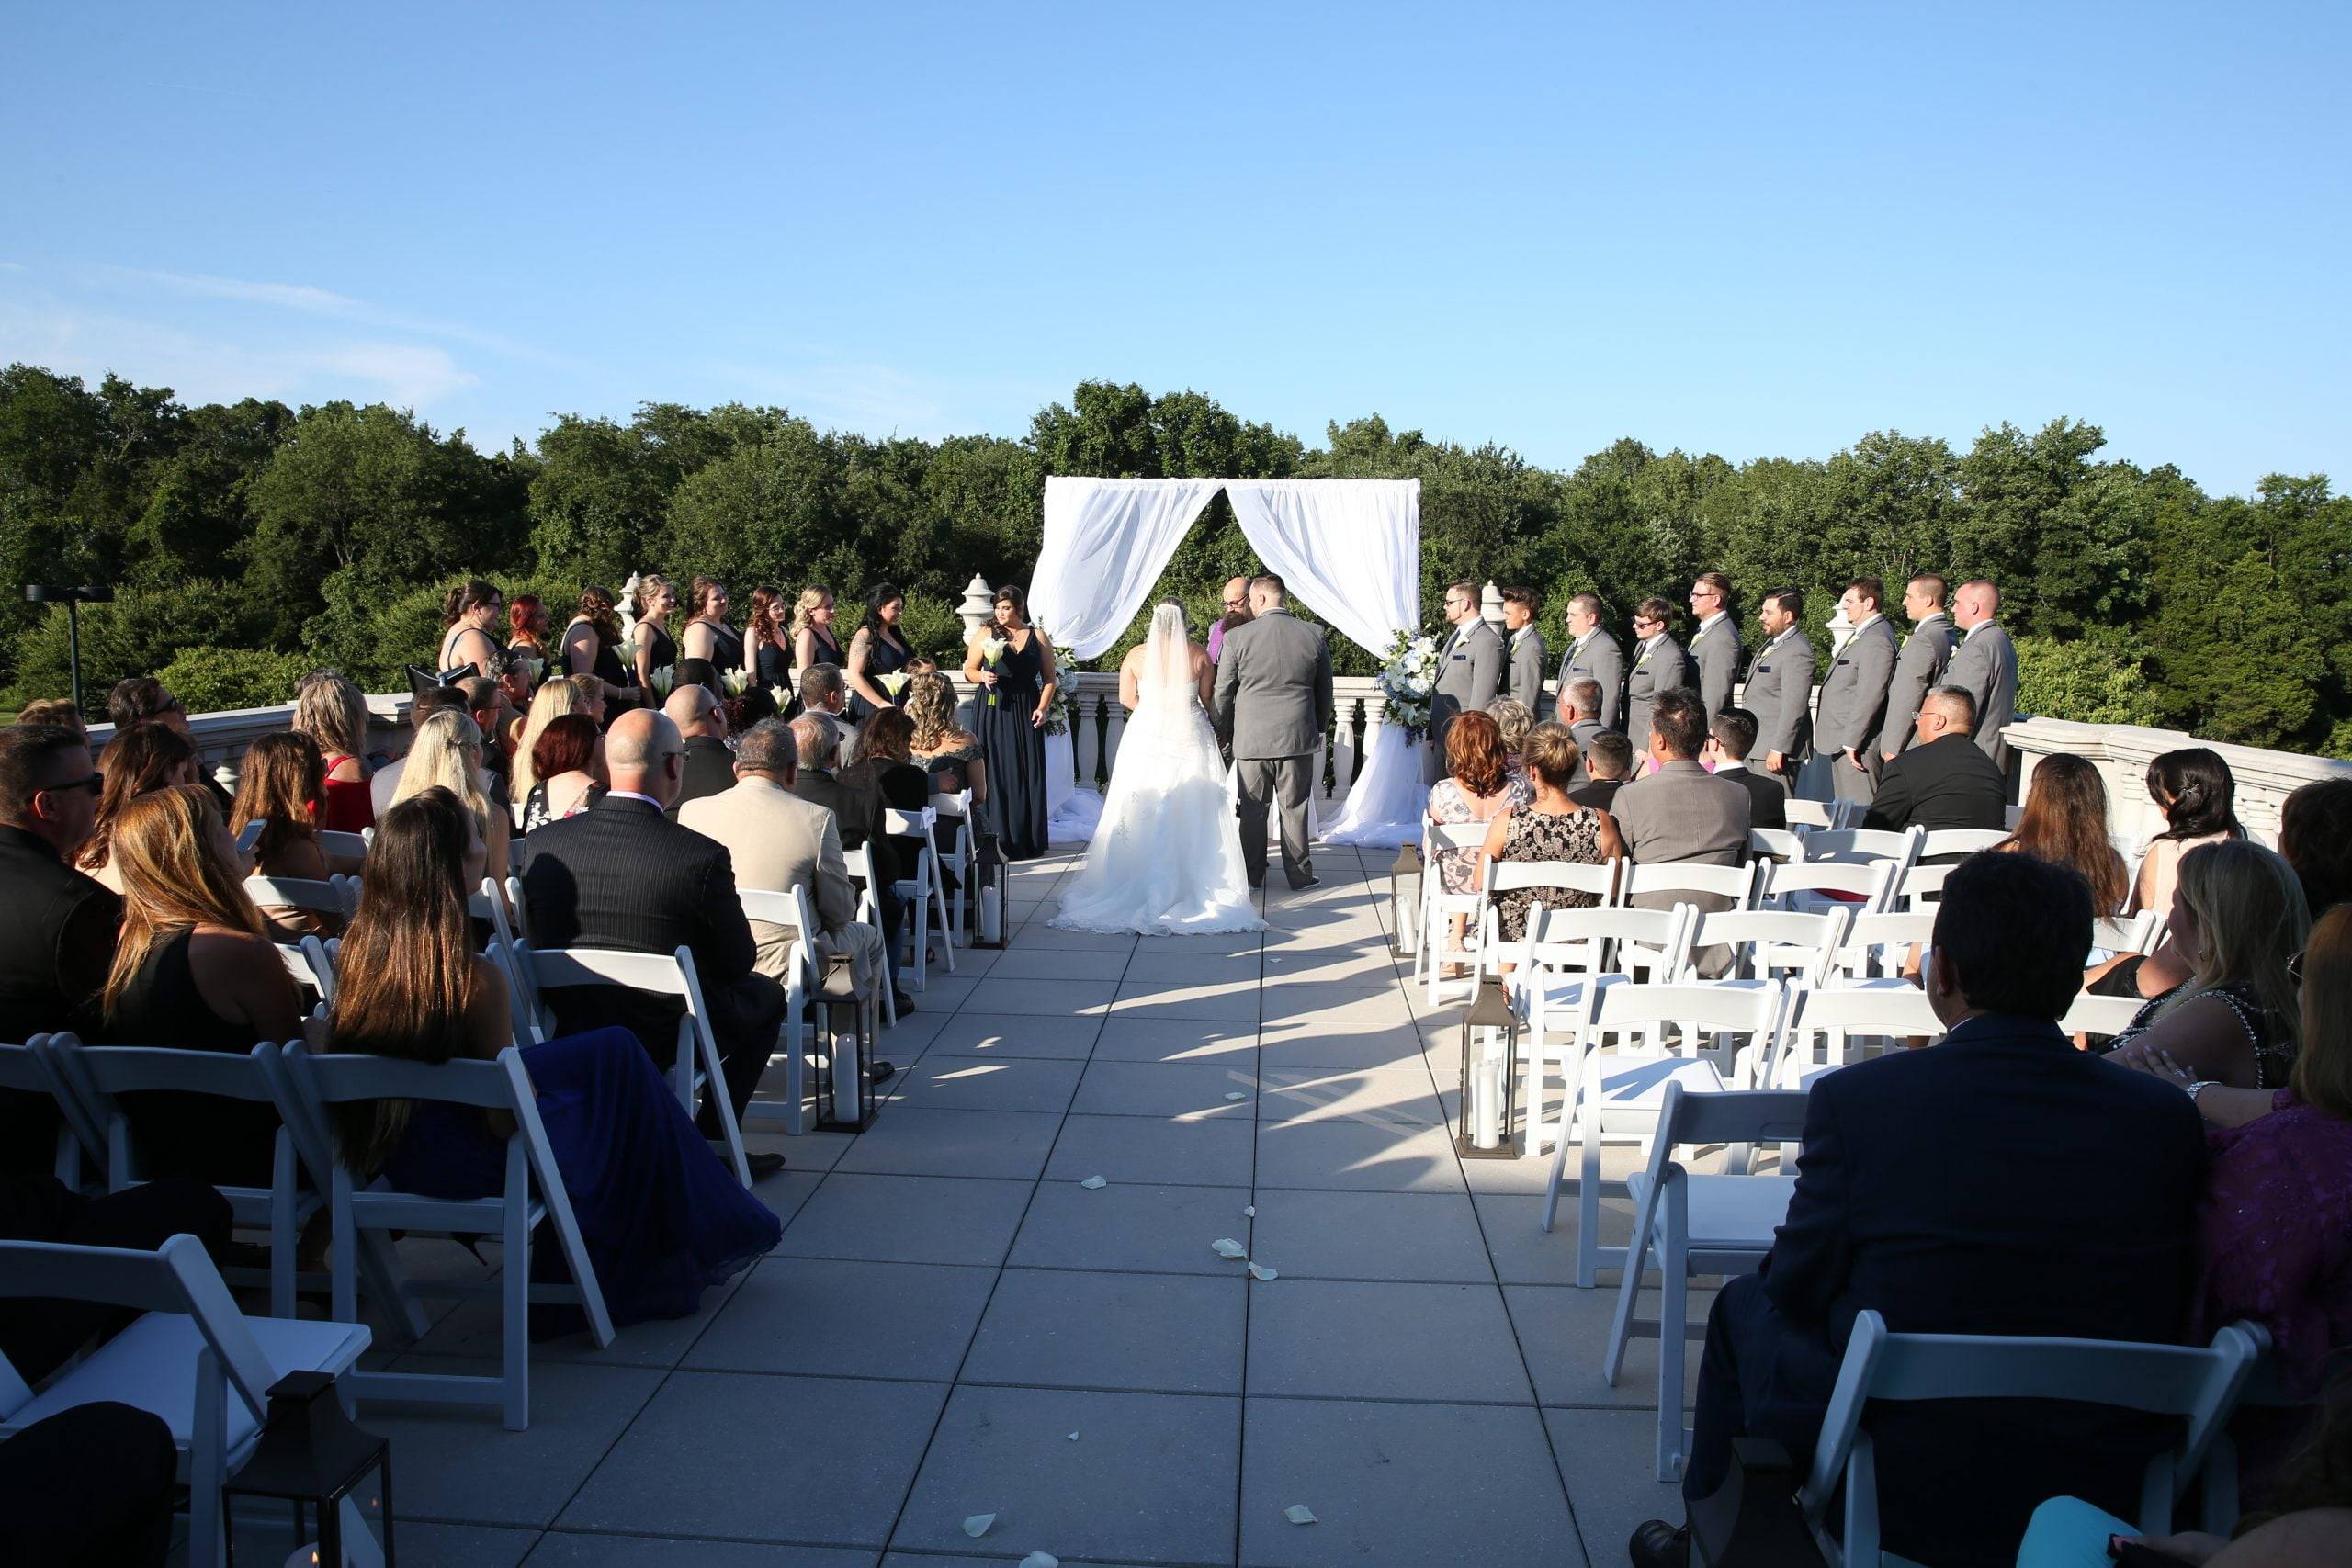 A wedding ceremony on the roof of a building.